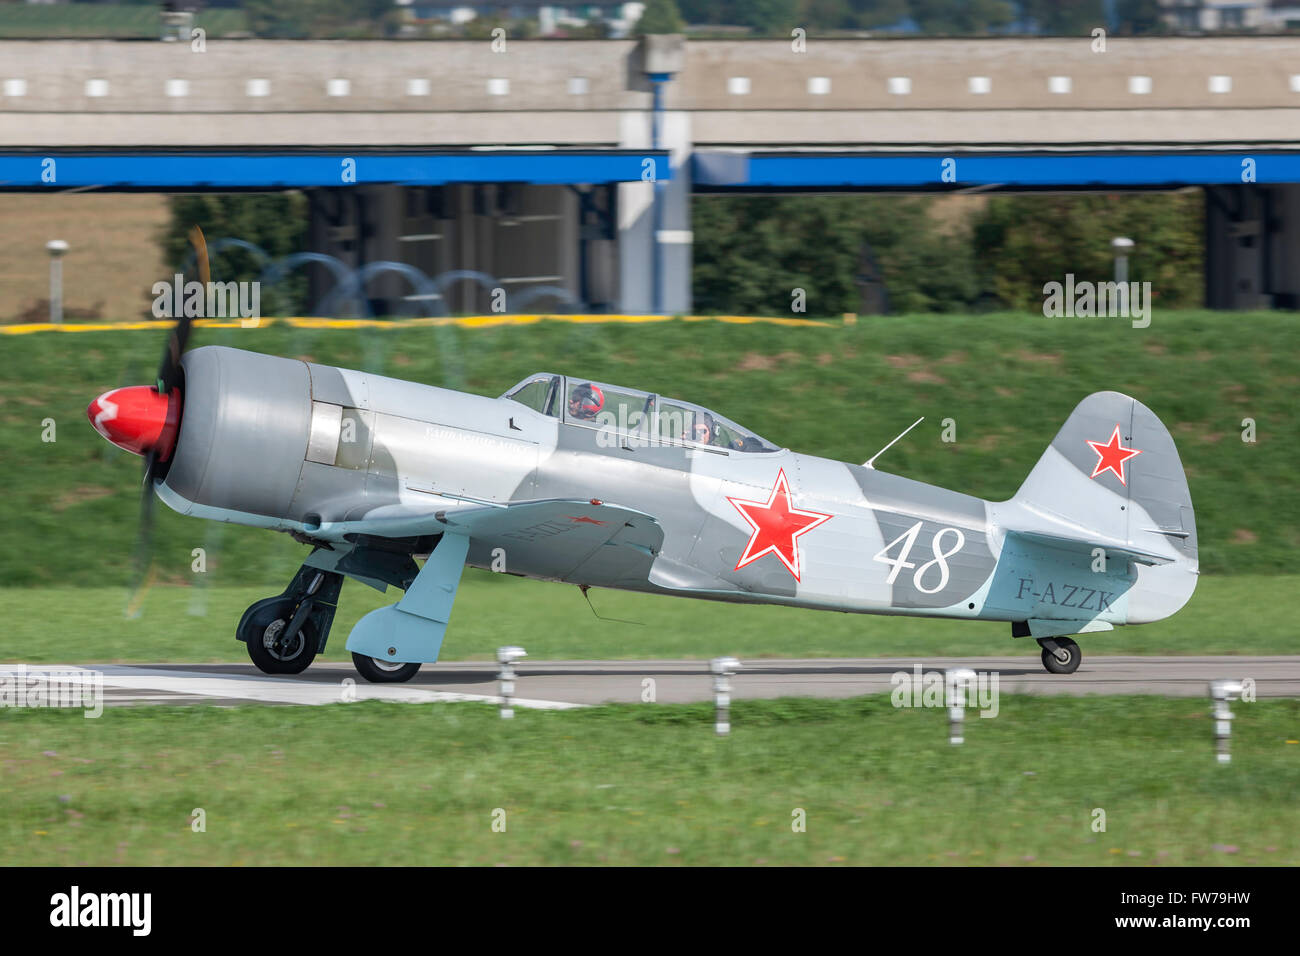 Yakovlev Yak-3UWP F-AZZK taking off with vortices forming around the aircraft from the tips of the propeller. Stock Photo